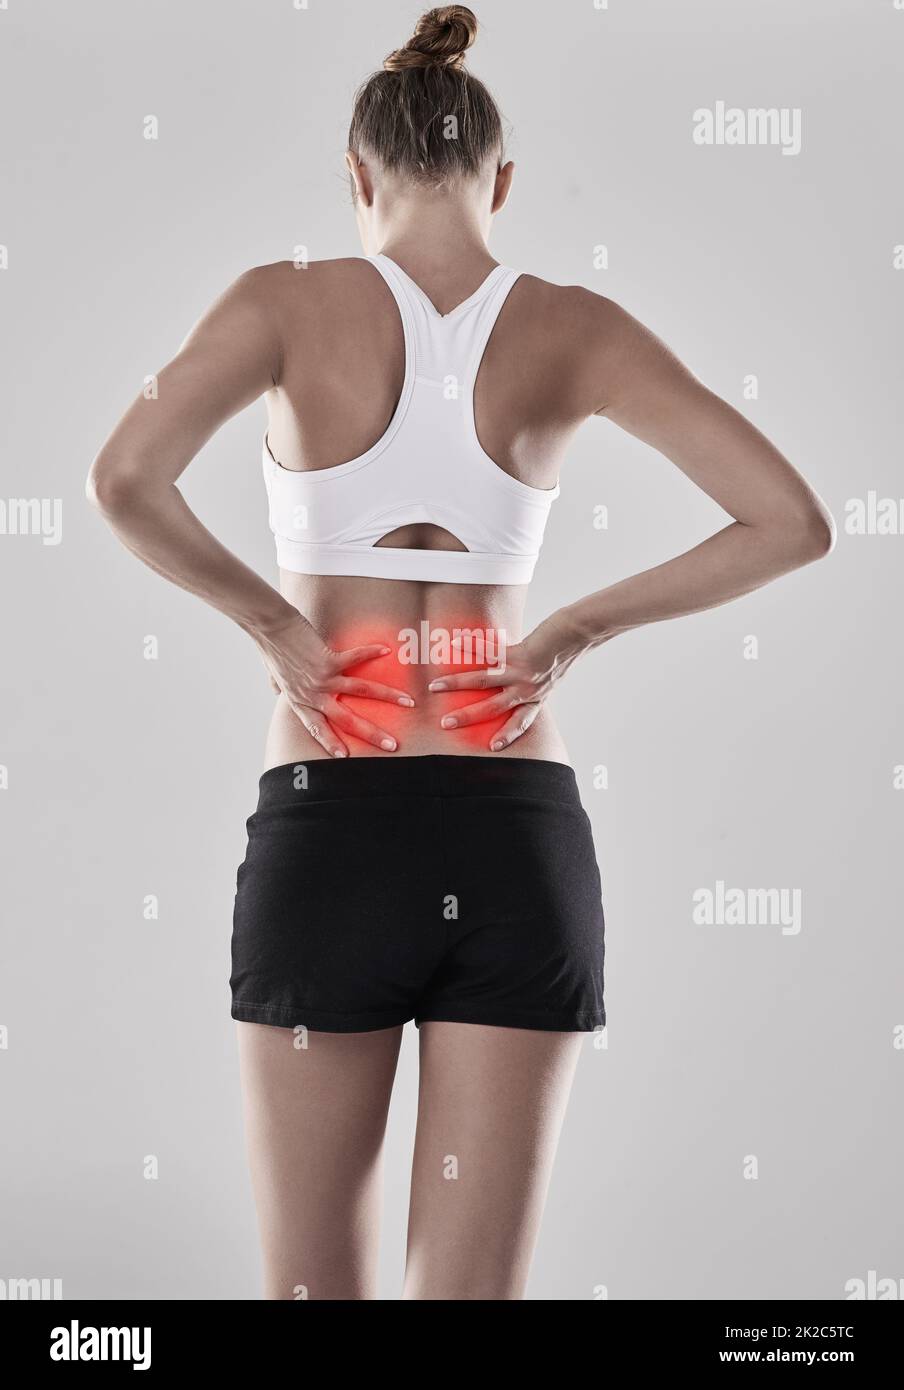 Pain in the back can be really unbearable and unpleasant. Shot of a young woman holding her injured back thats highlighted in red. Stock Photo